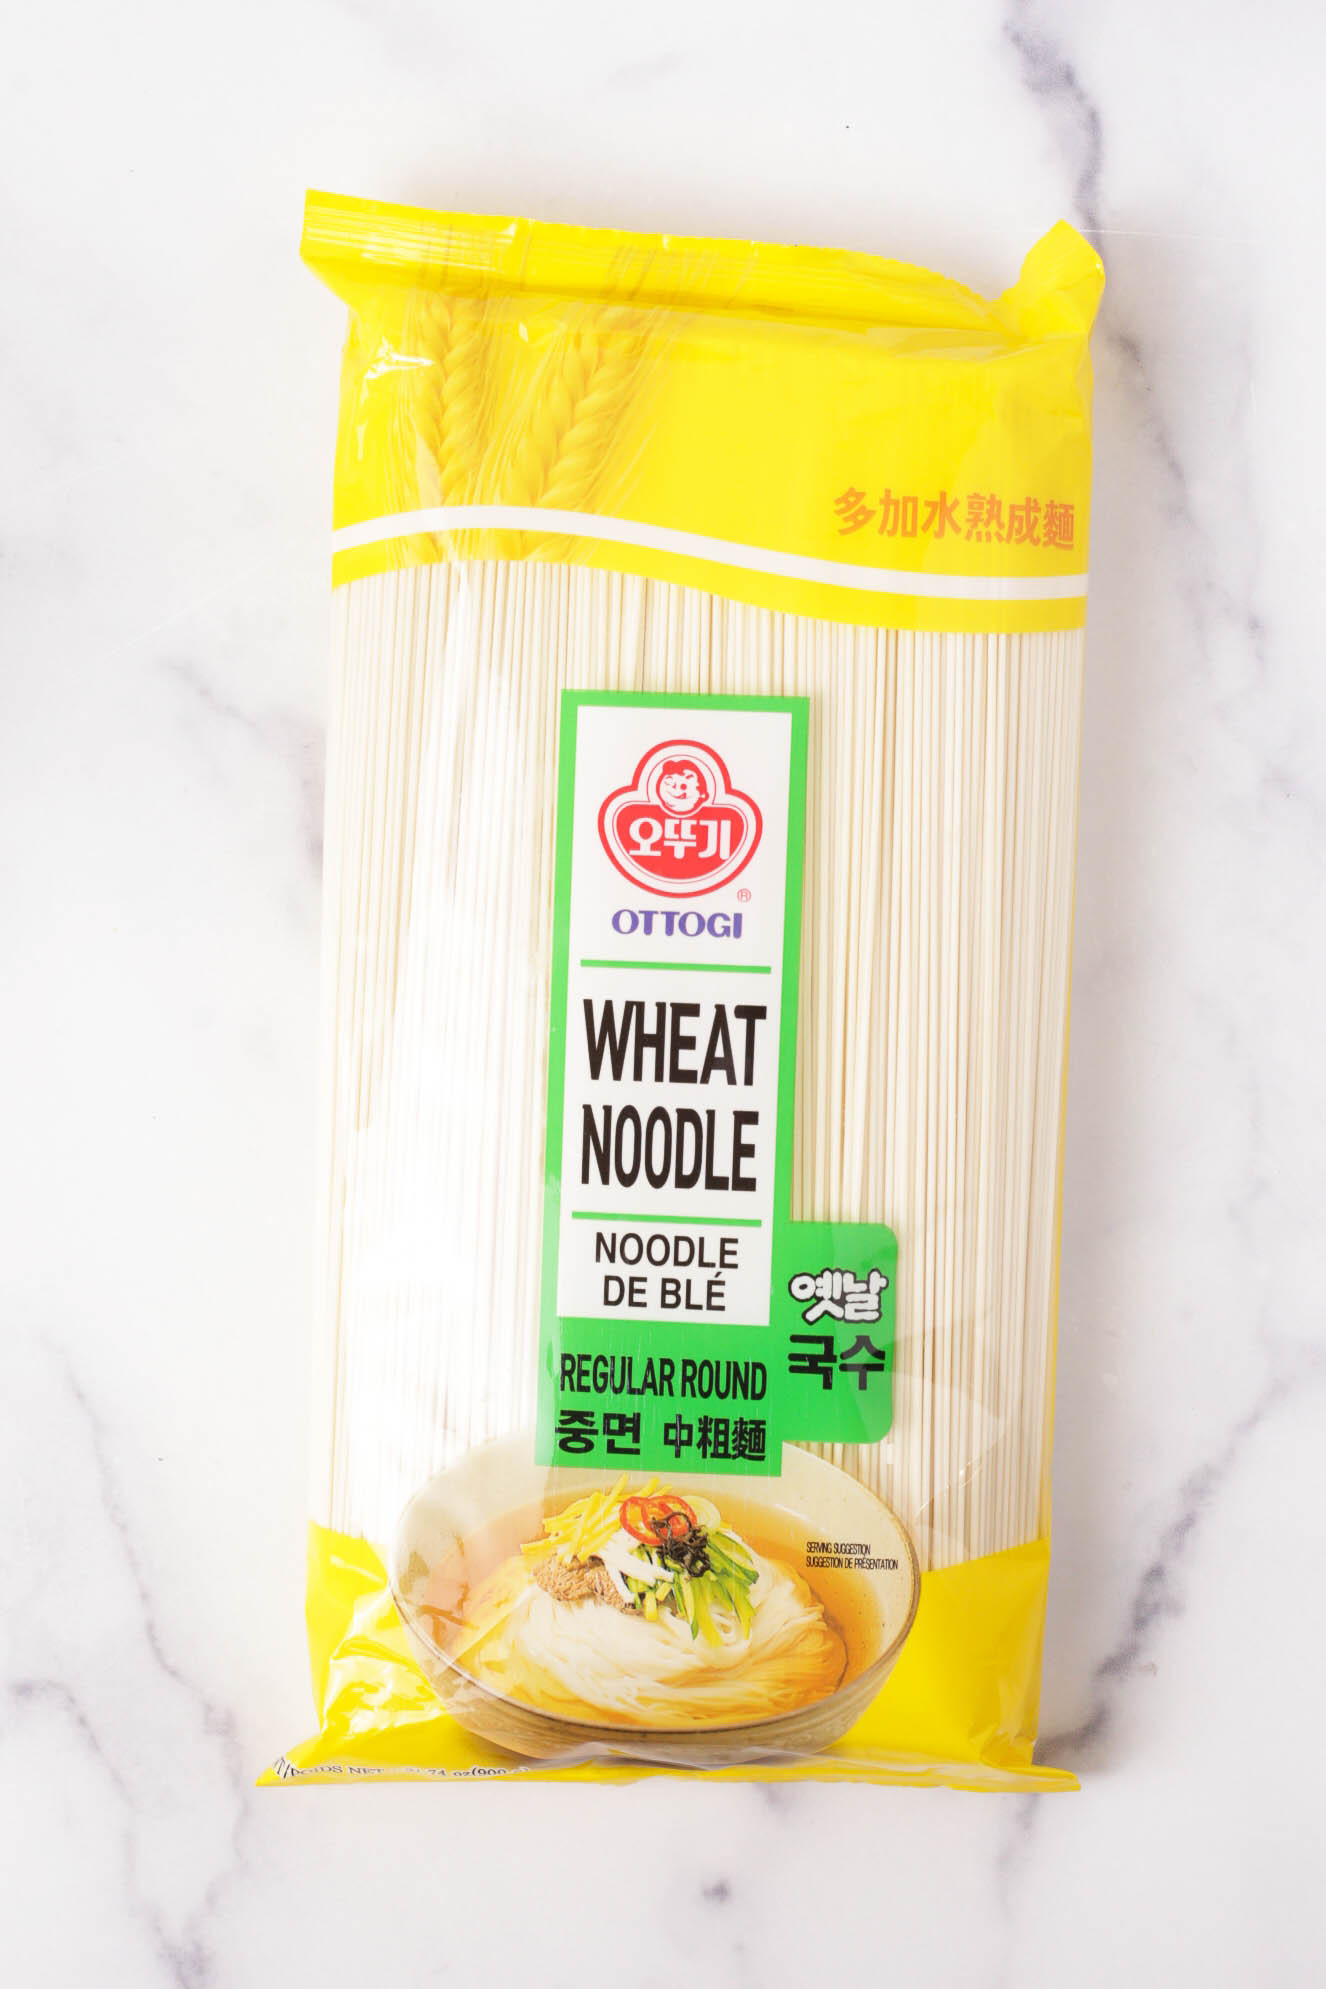 Package of wheat noodles.